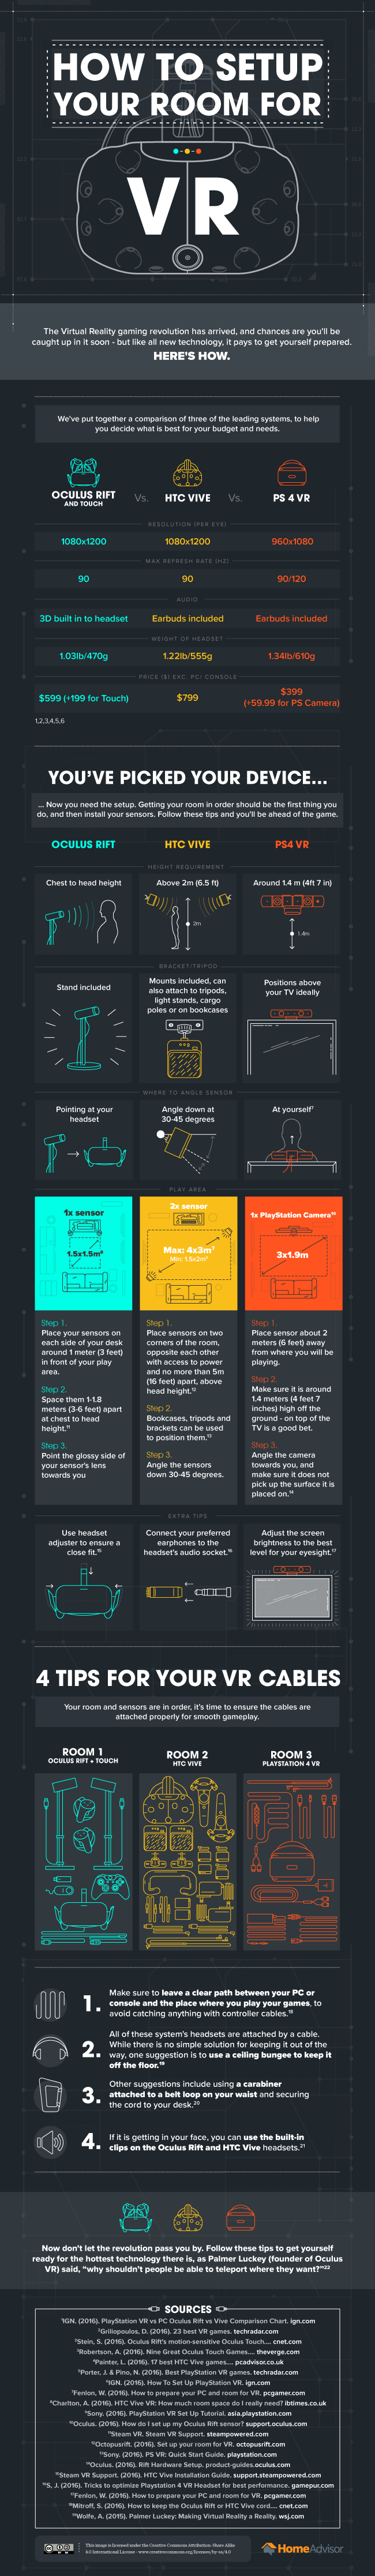 How to Set Up Your Room for Virtual Reality Gadgets [infographic]